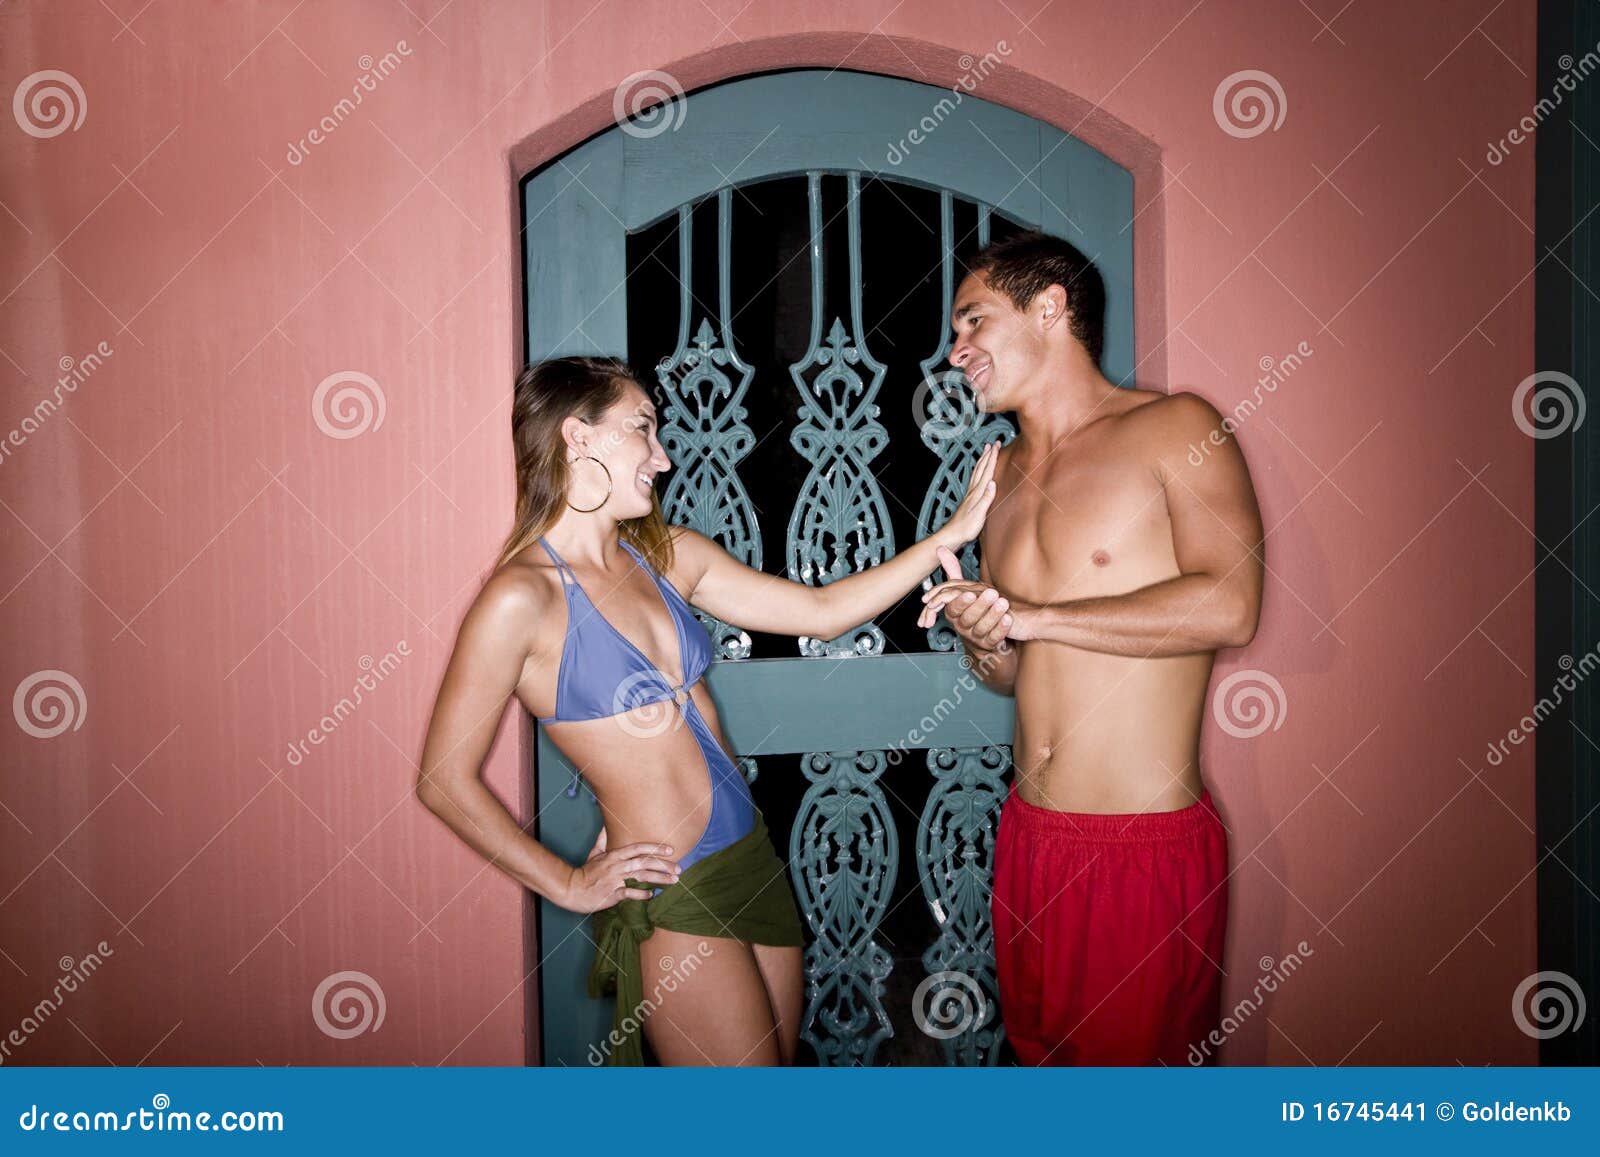 young couple in swimsuits flirting